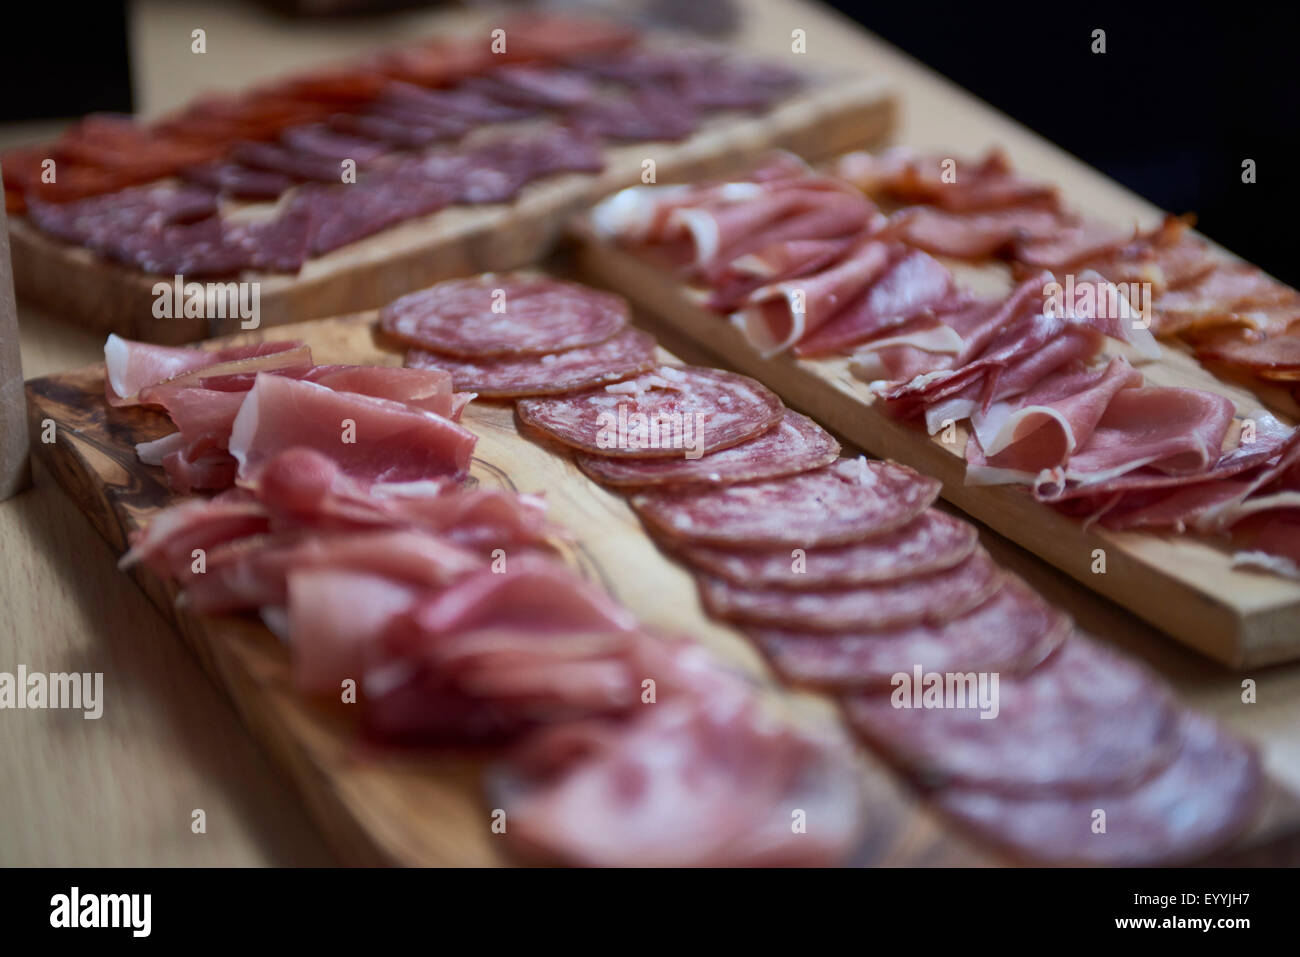 meats on a board Stock Photo